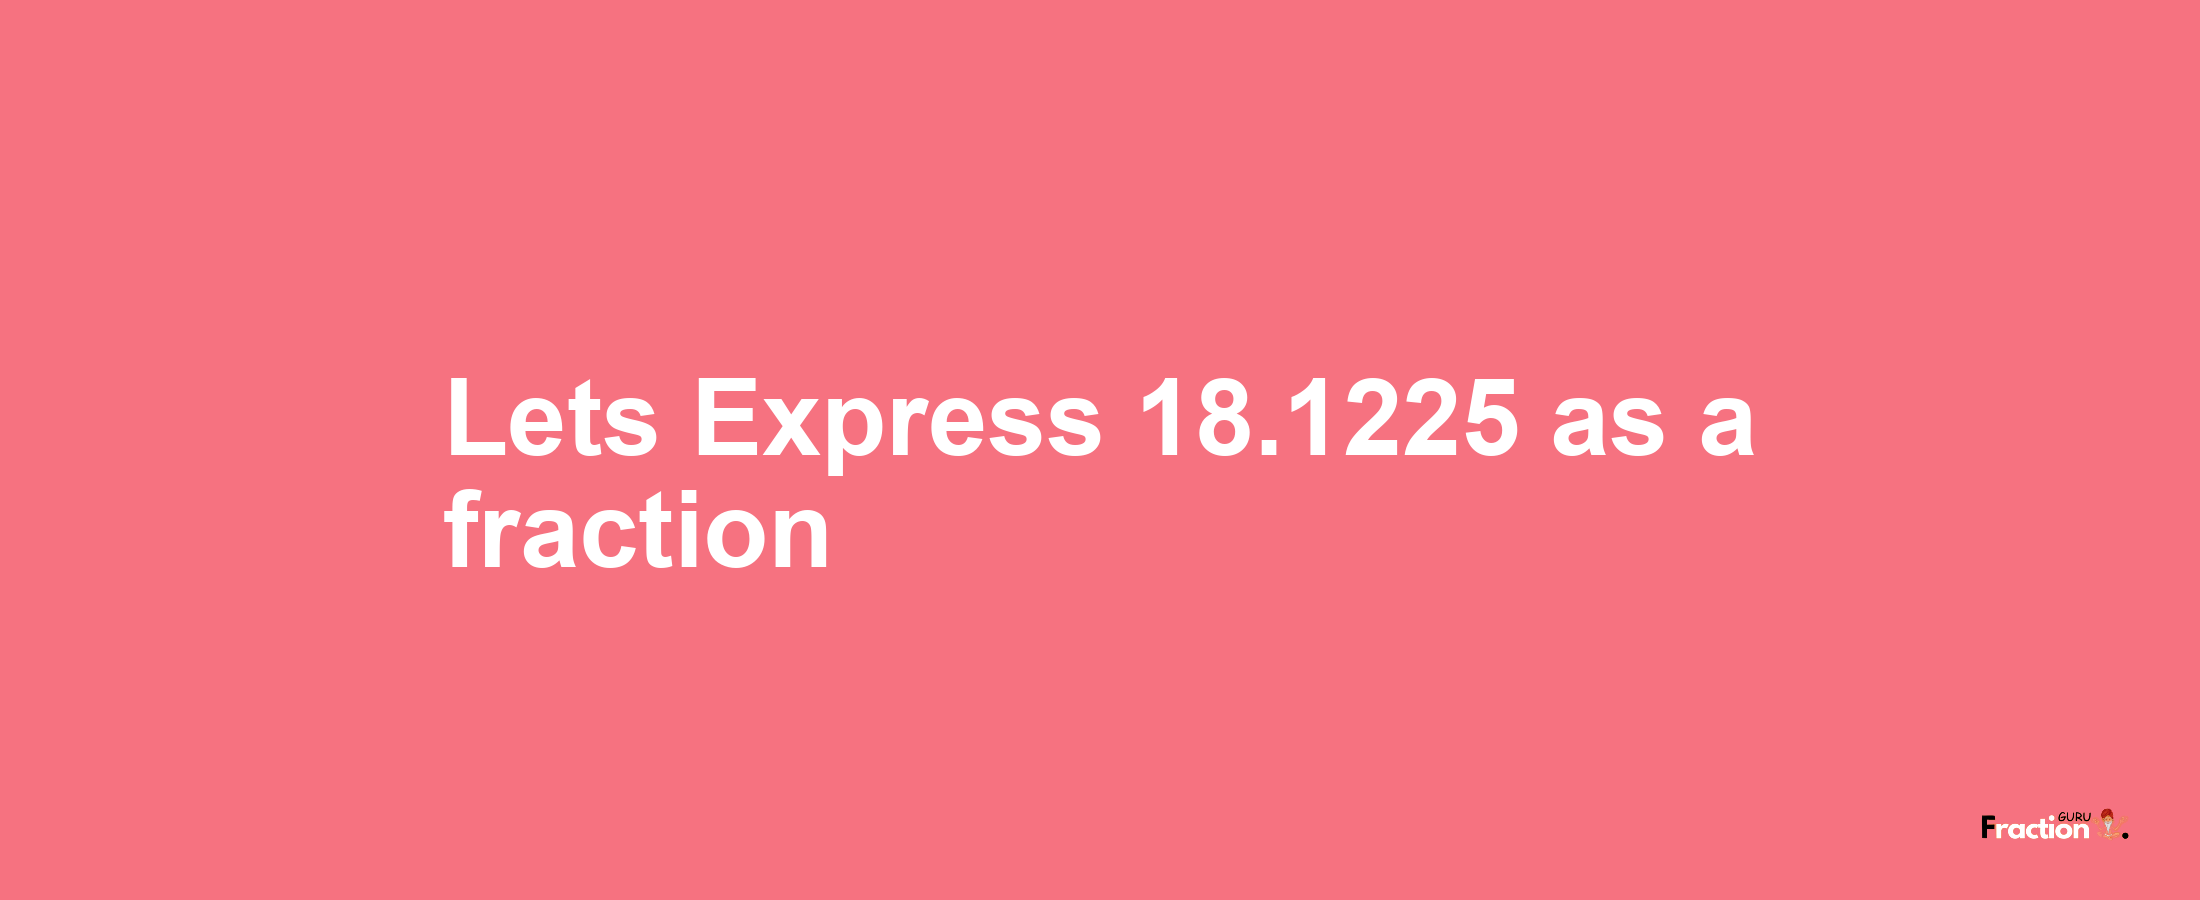 Lets Express 18.1225 as afraction